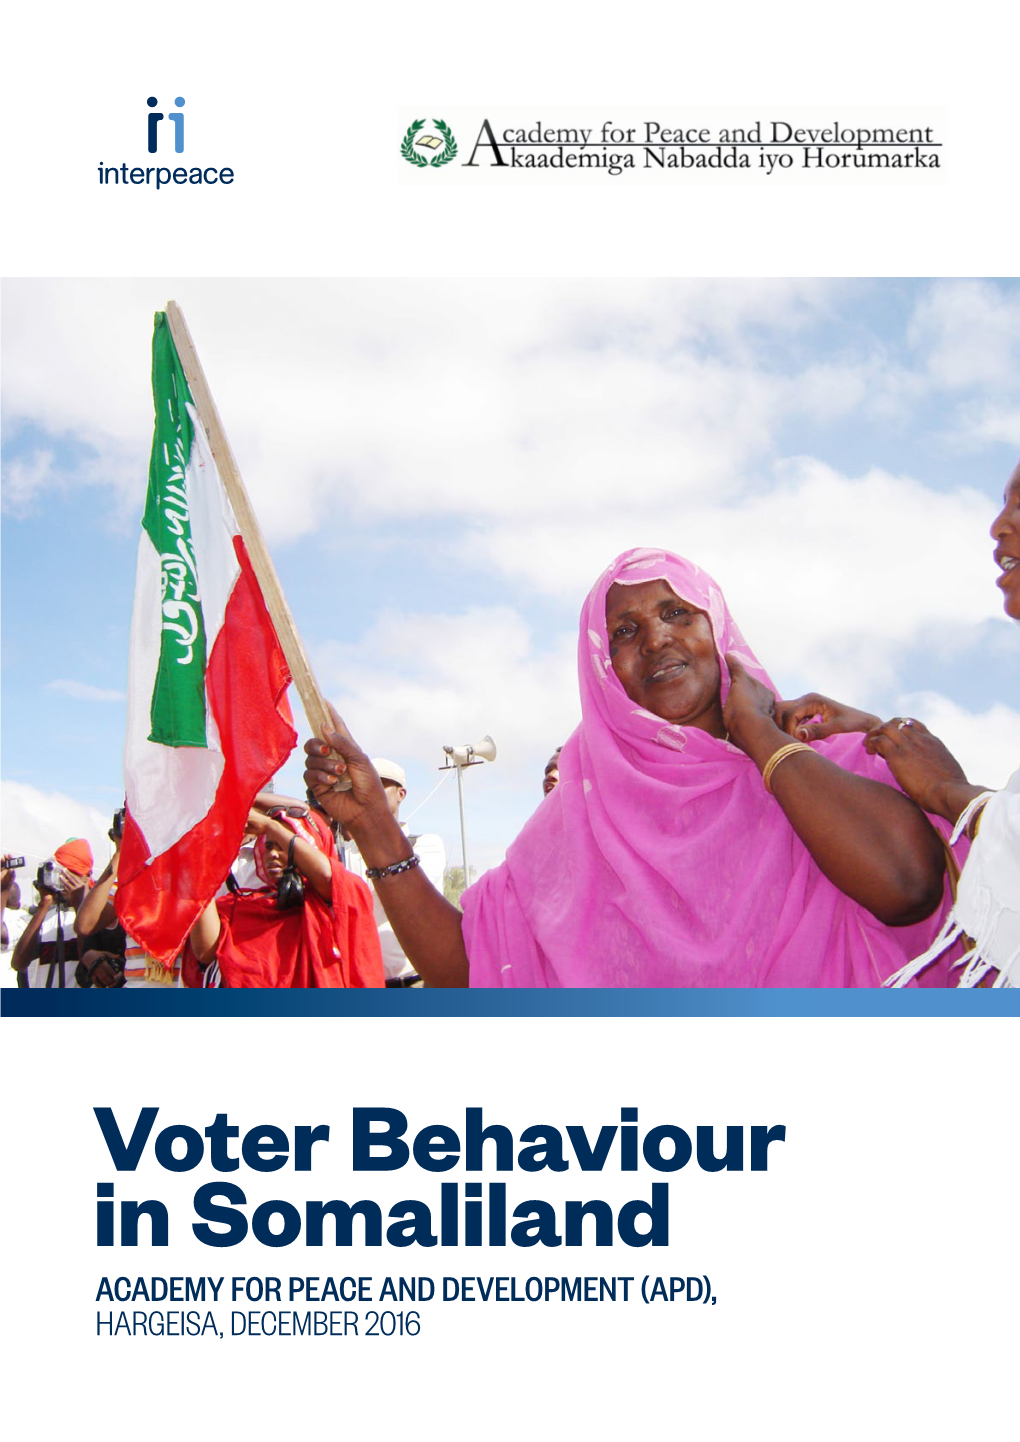 Voter Behaviour in Somaliland ACADEMY for PEACE and DEVELOPMENT (APD), HARGEISA, DECEMBER 2016 Voter Behaviour in Somaliland